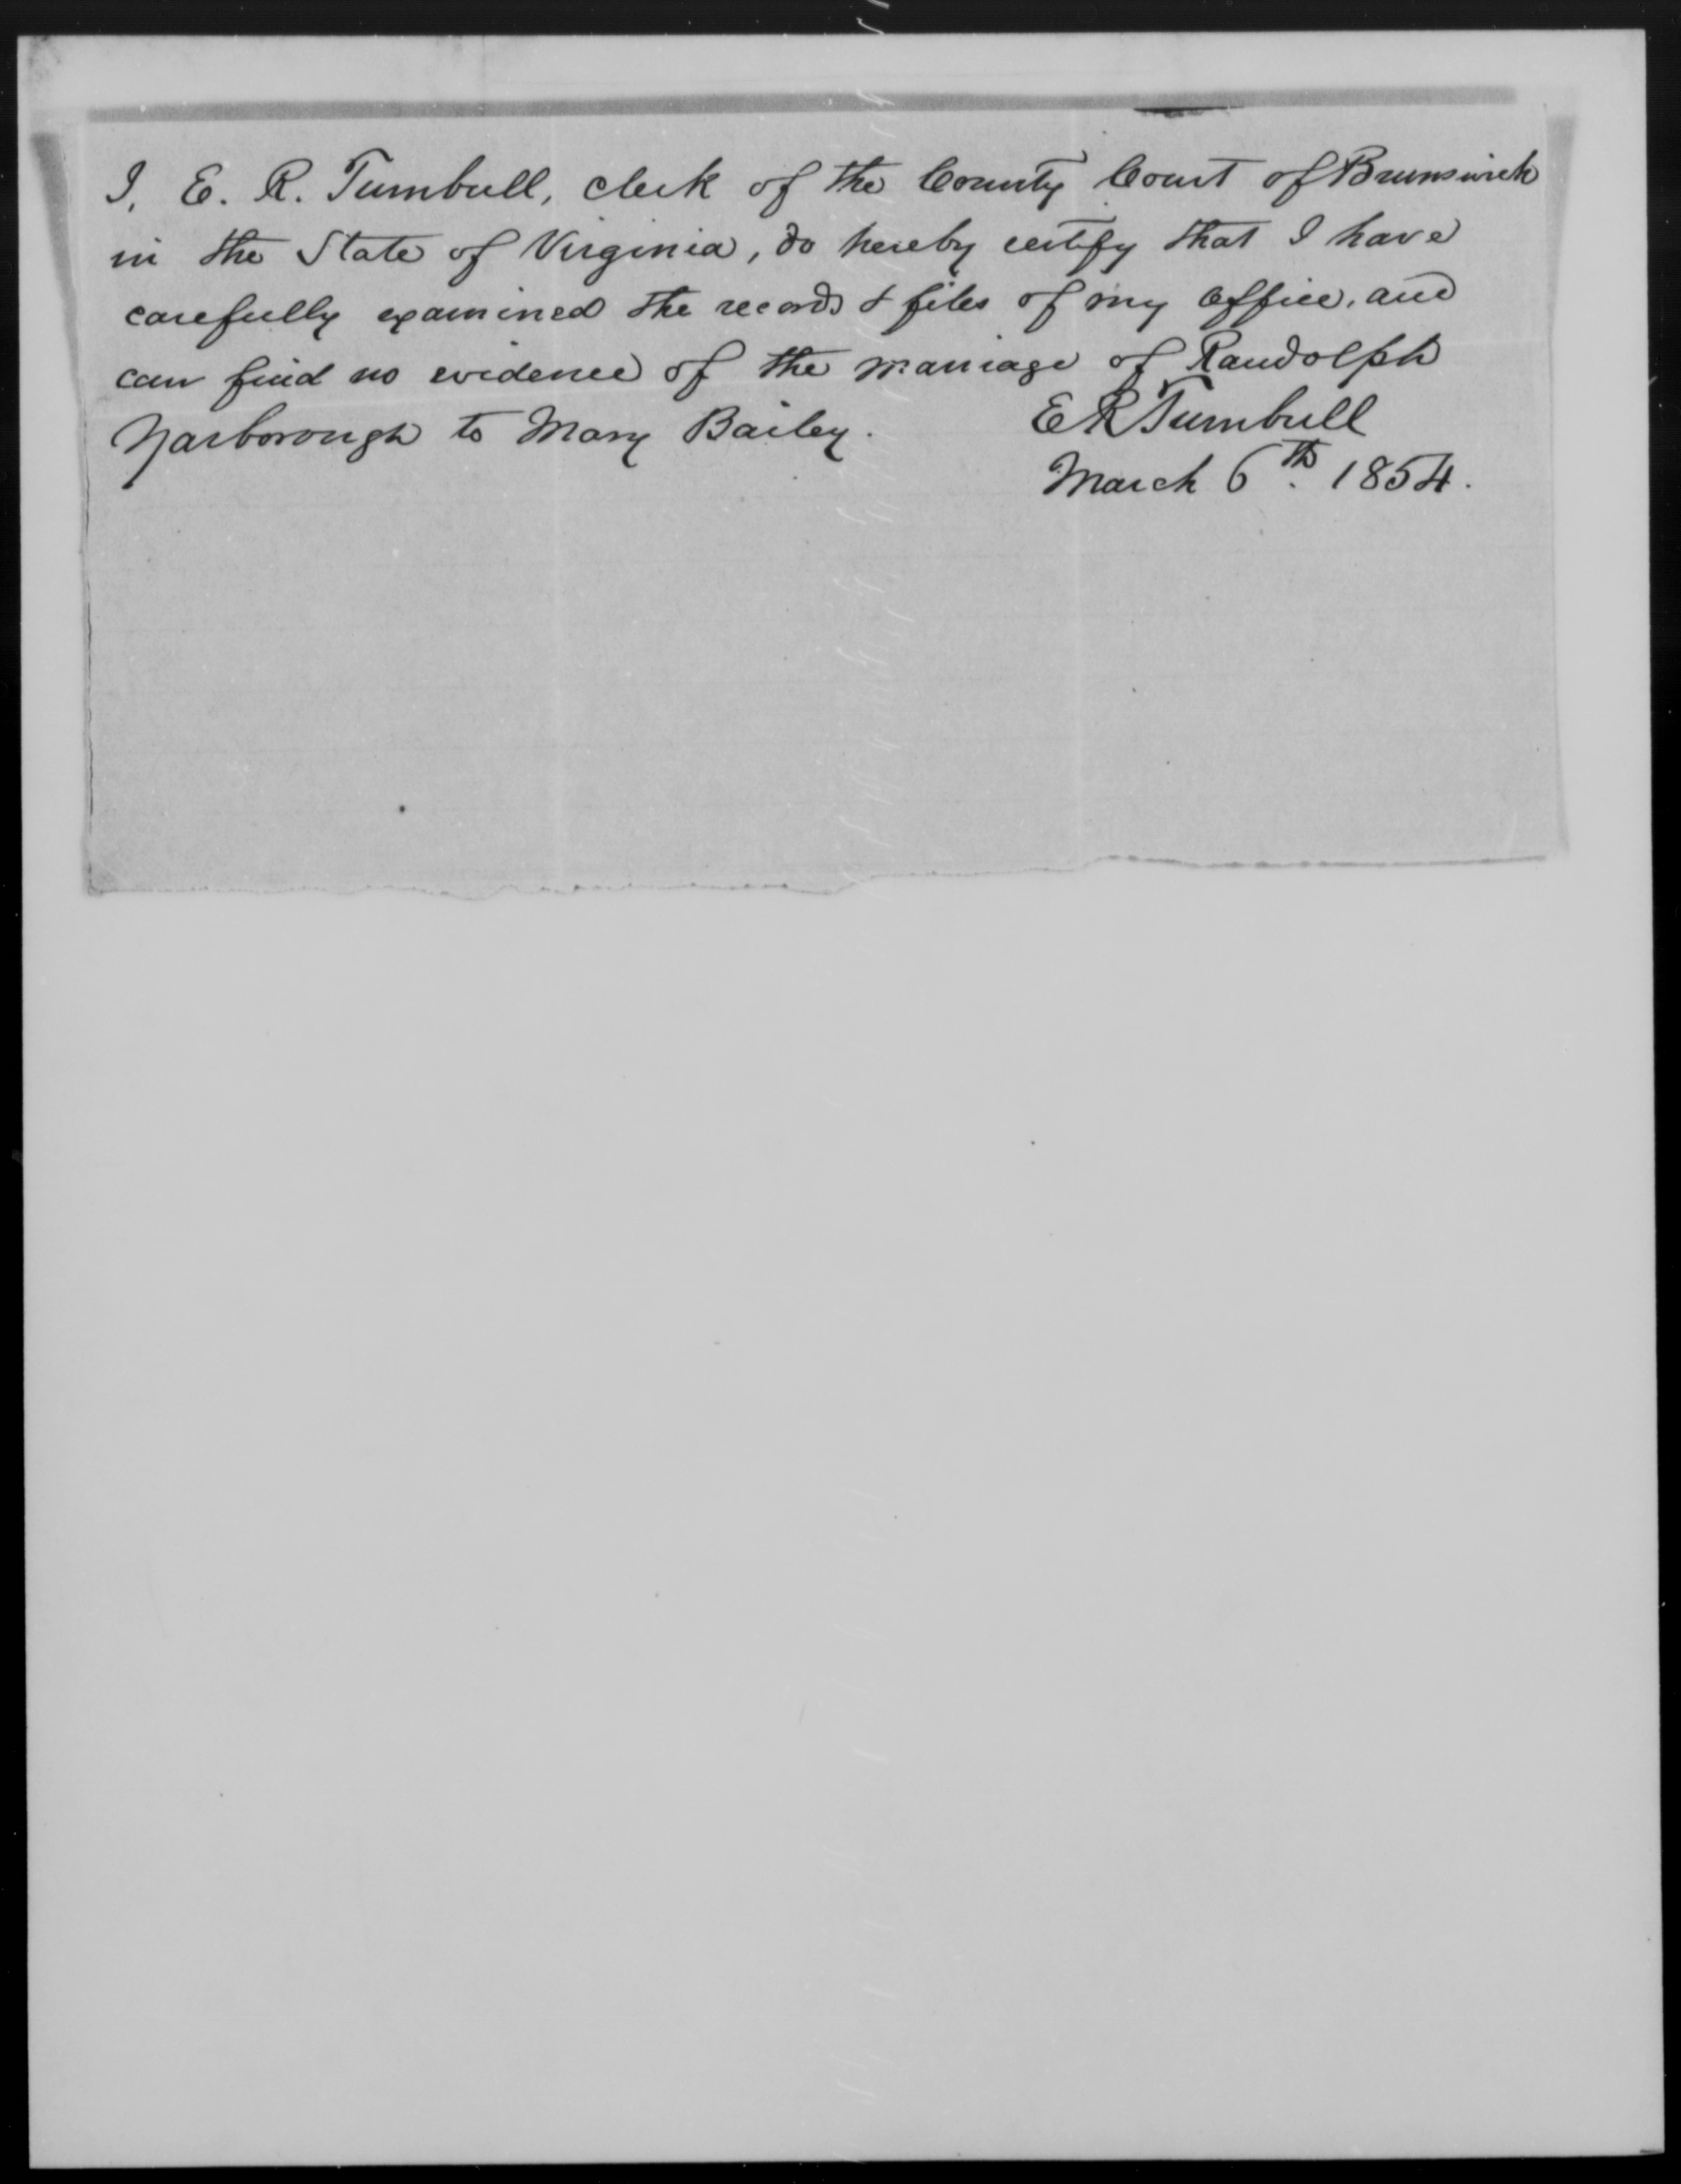 Proof of Marriage for Randolph Yarborough and Mary Bailey, 6 March 1854